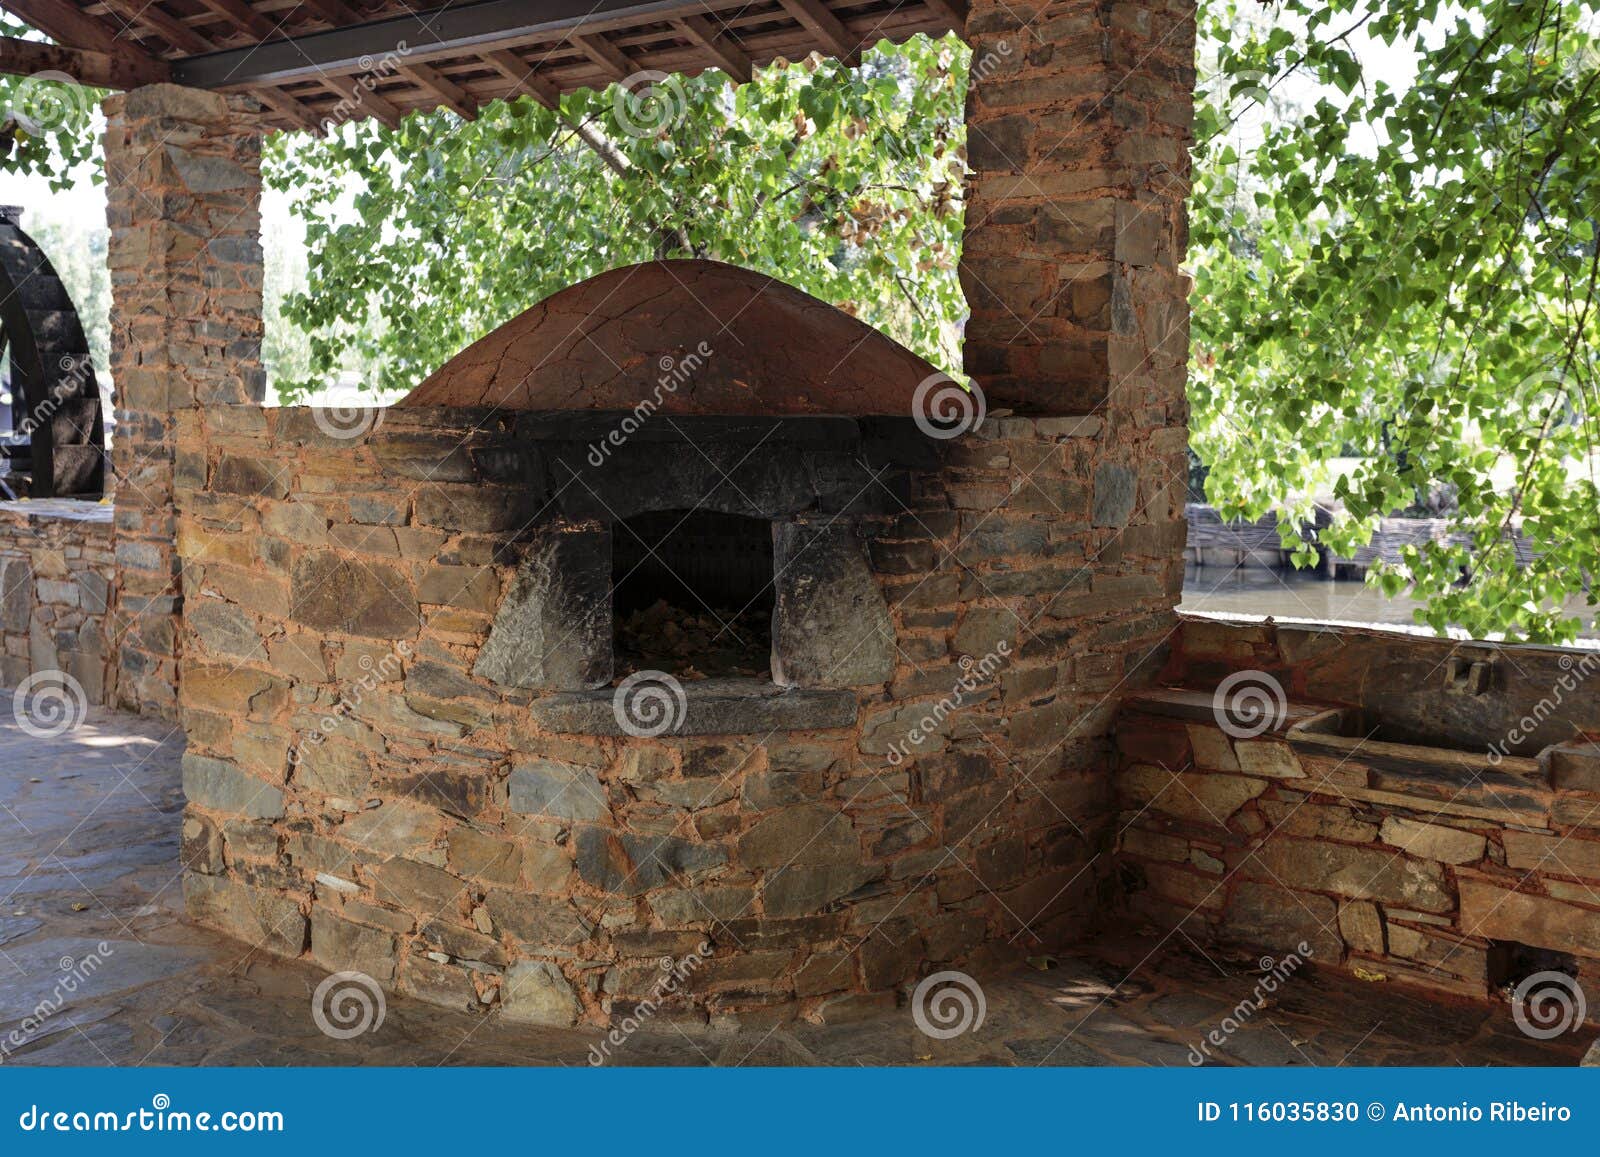 serta local ethnography communal wood fired oven